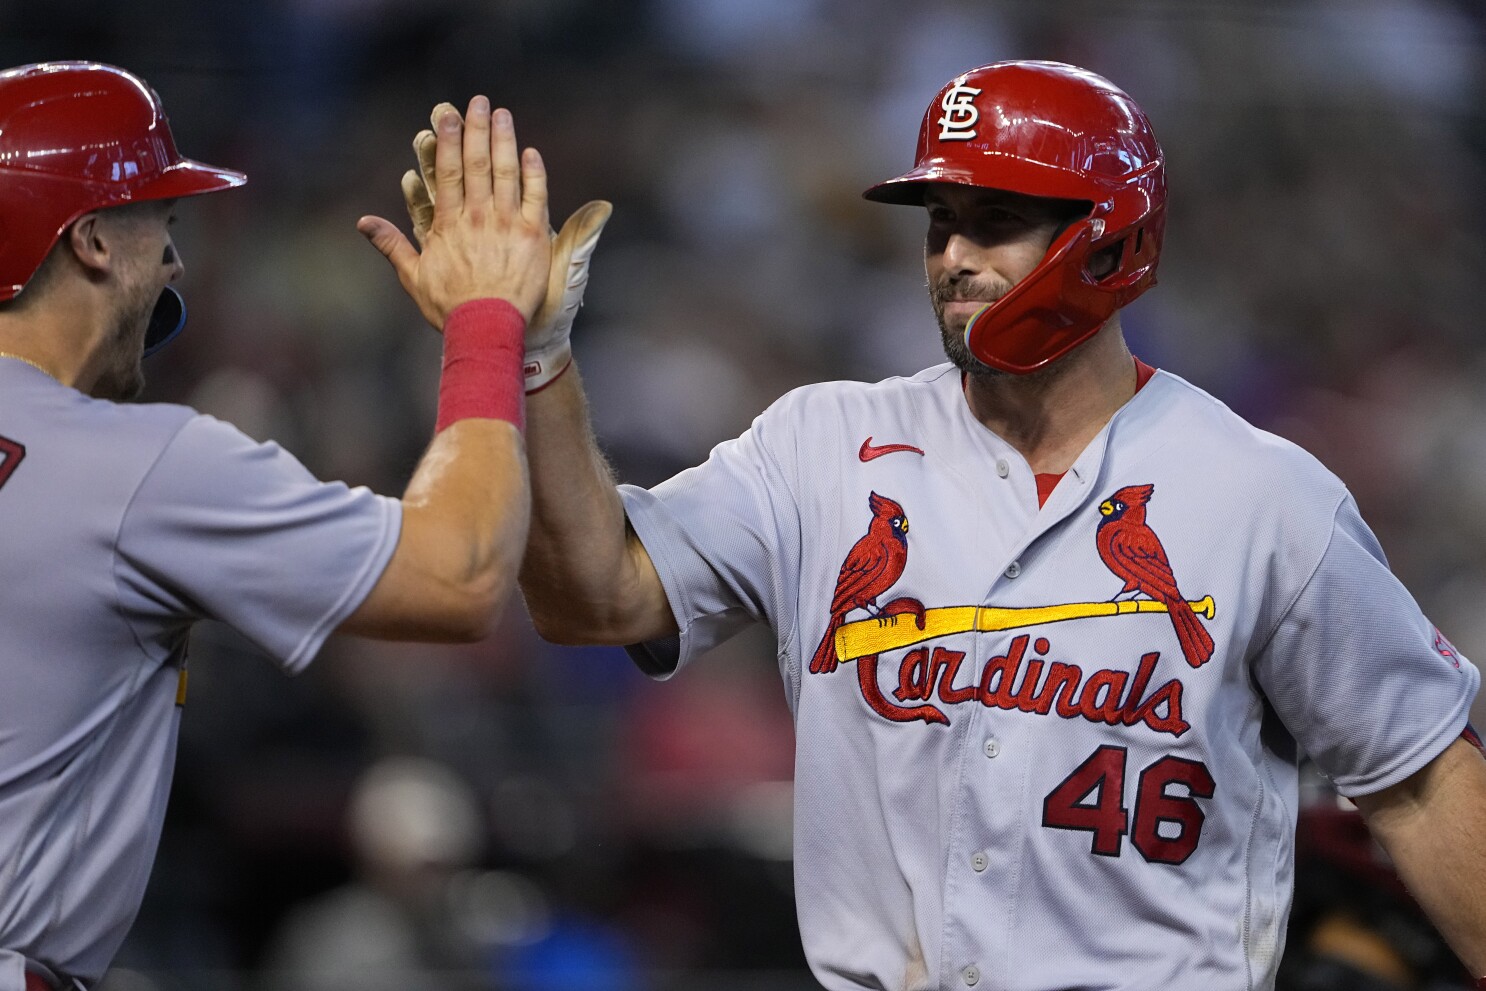 St. Louis Cardinals on X: In his five seasons with the Cardinals